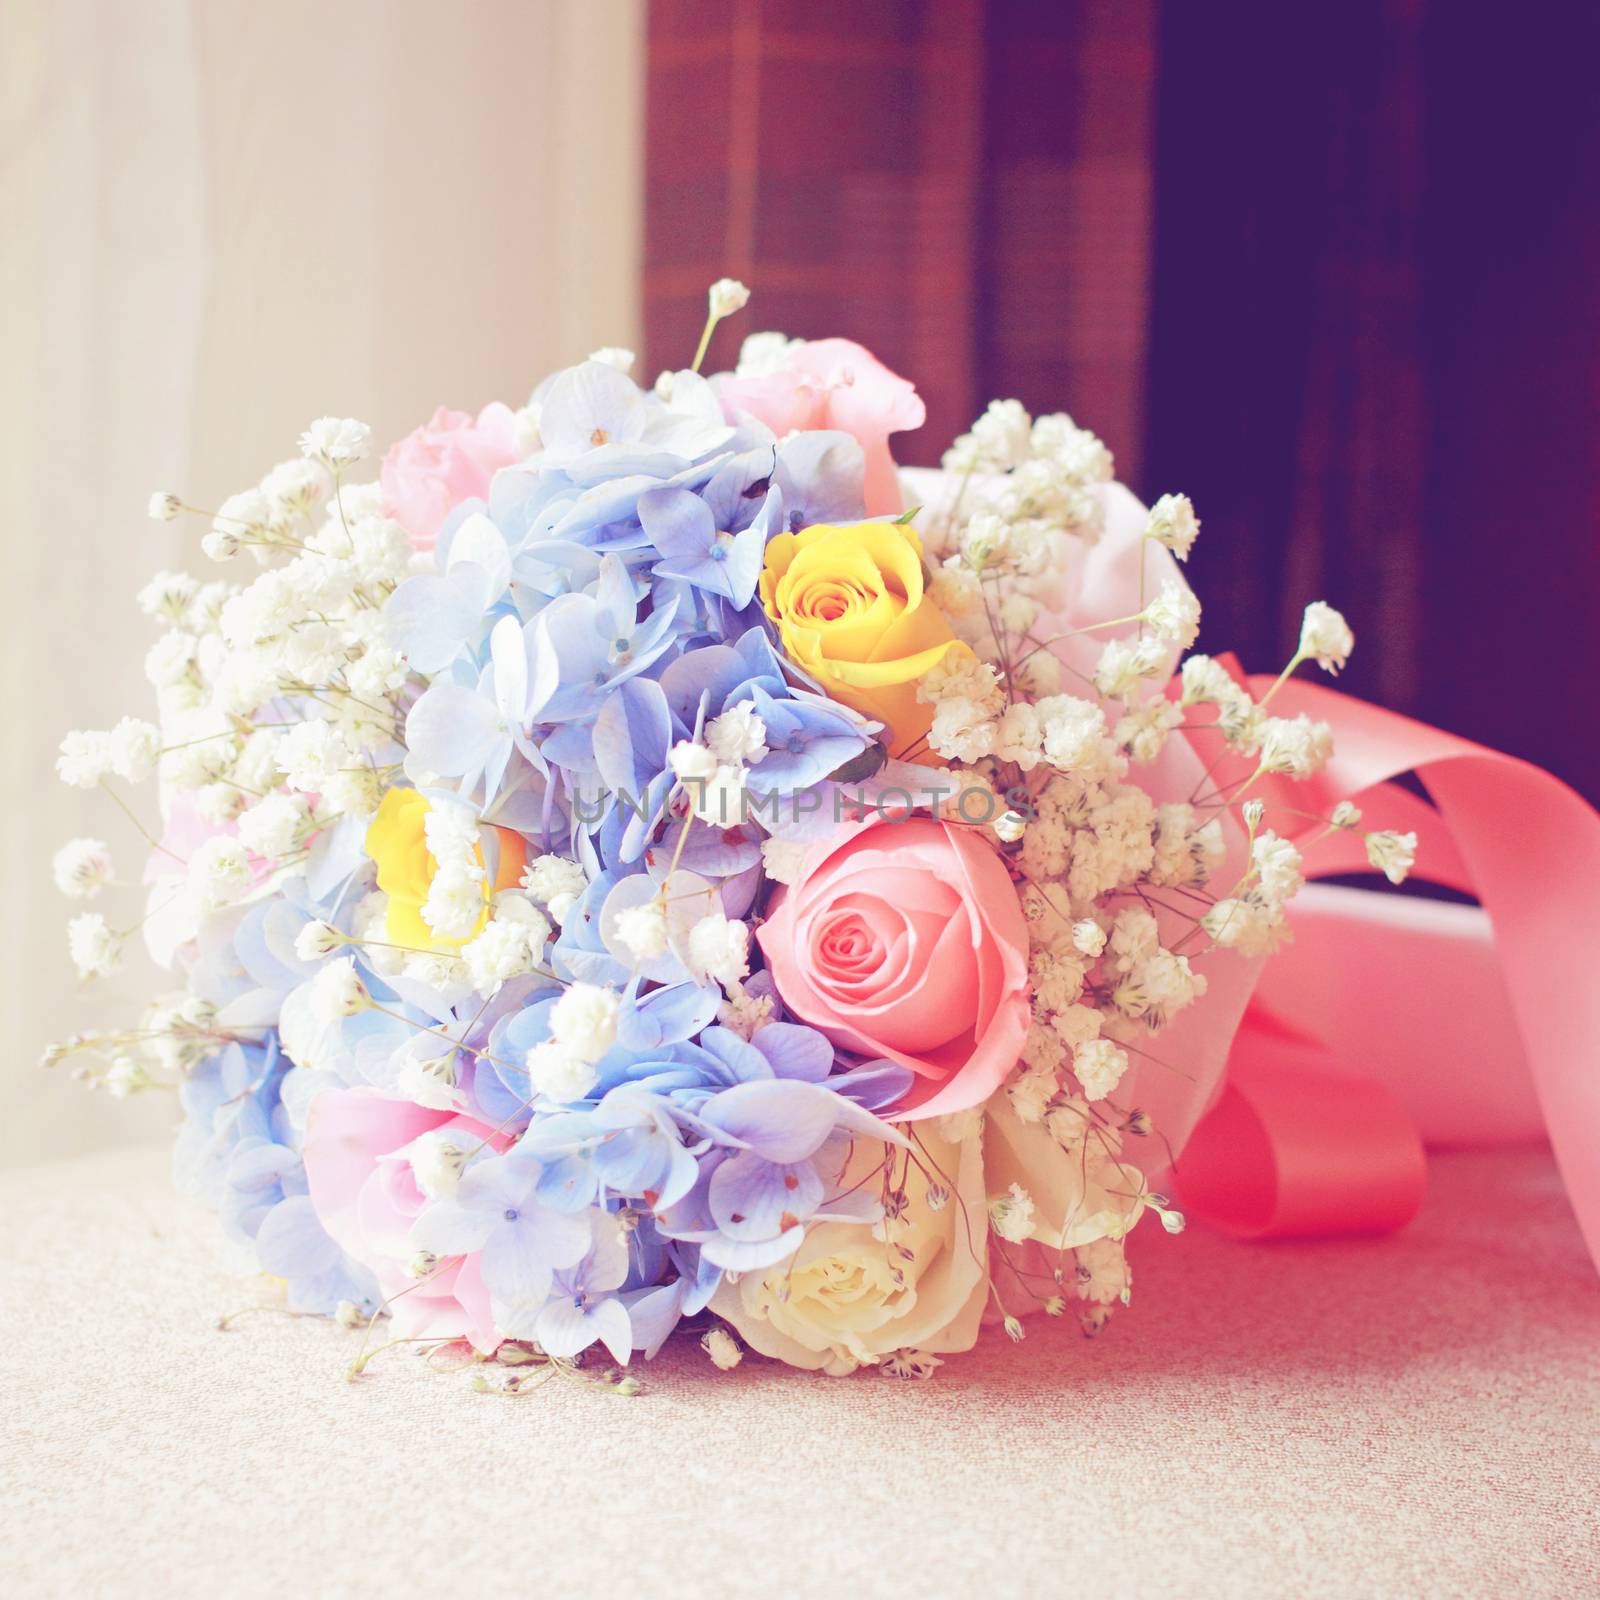 Beautiful bouquet for wedding ceremony with retro filter by nuchylee